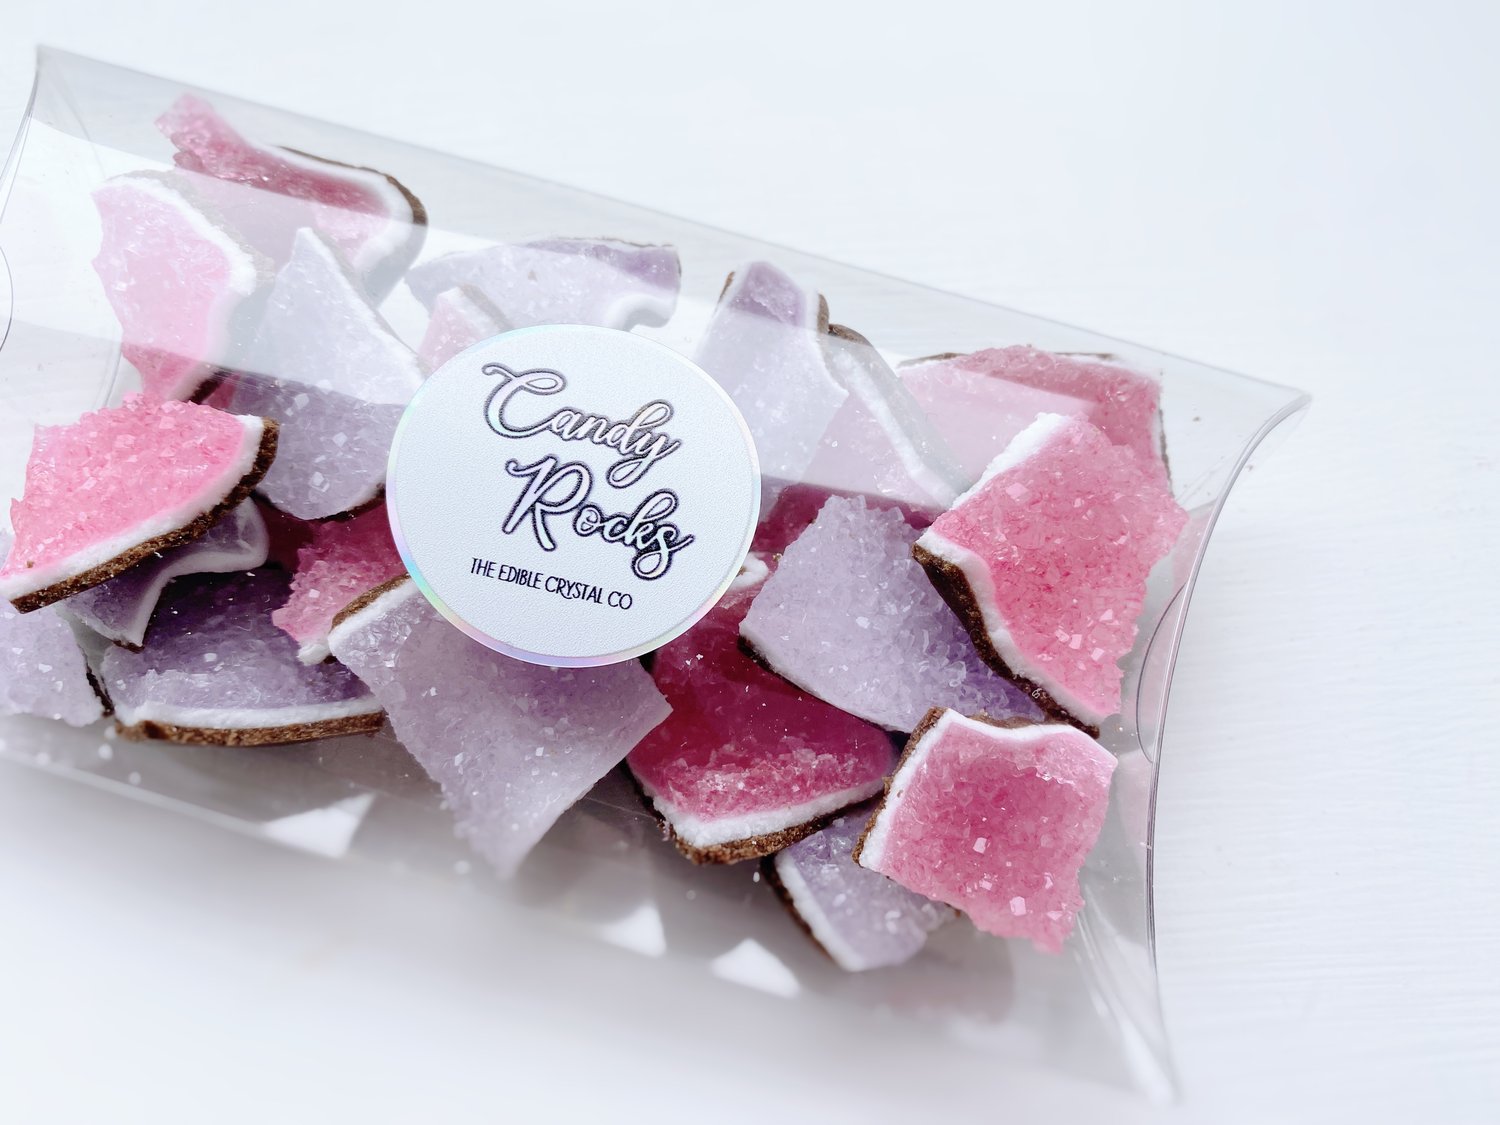 Boxed Edible Crystal Geode Pieces — Candy Rocks